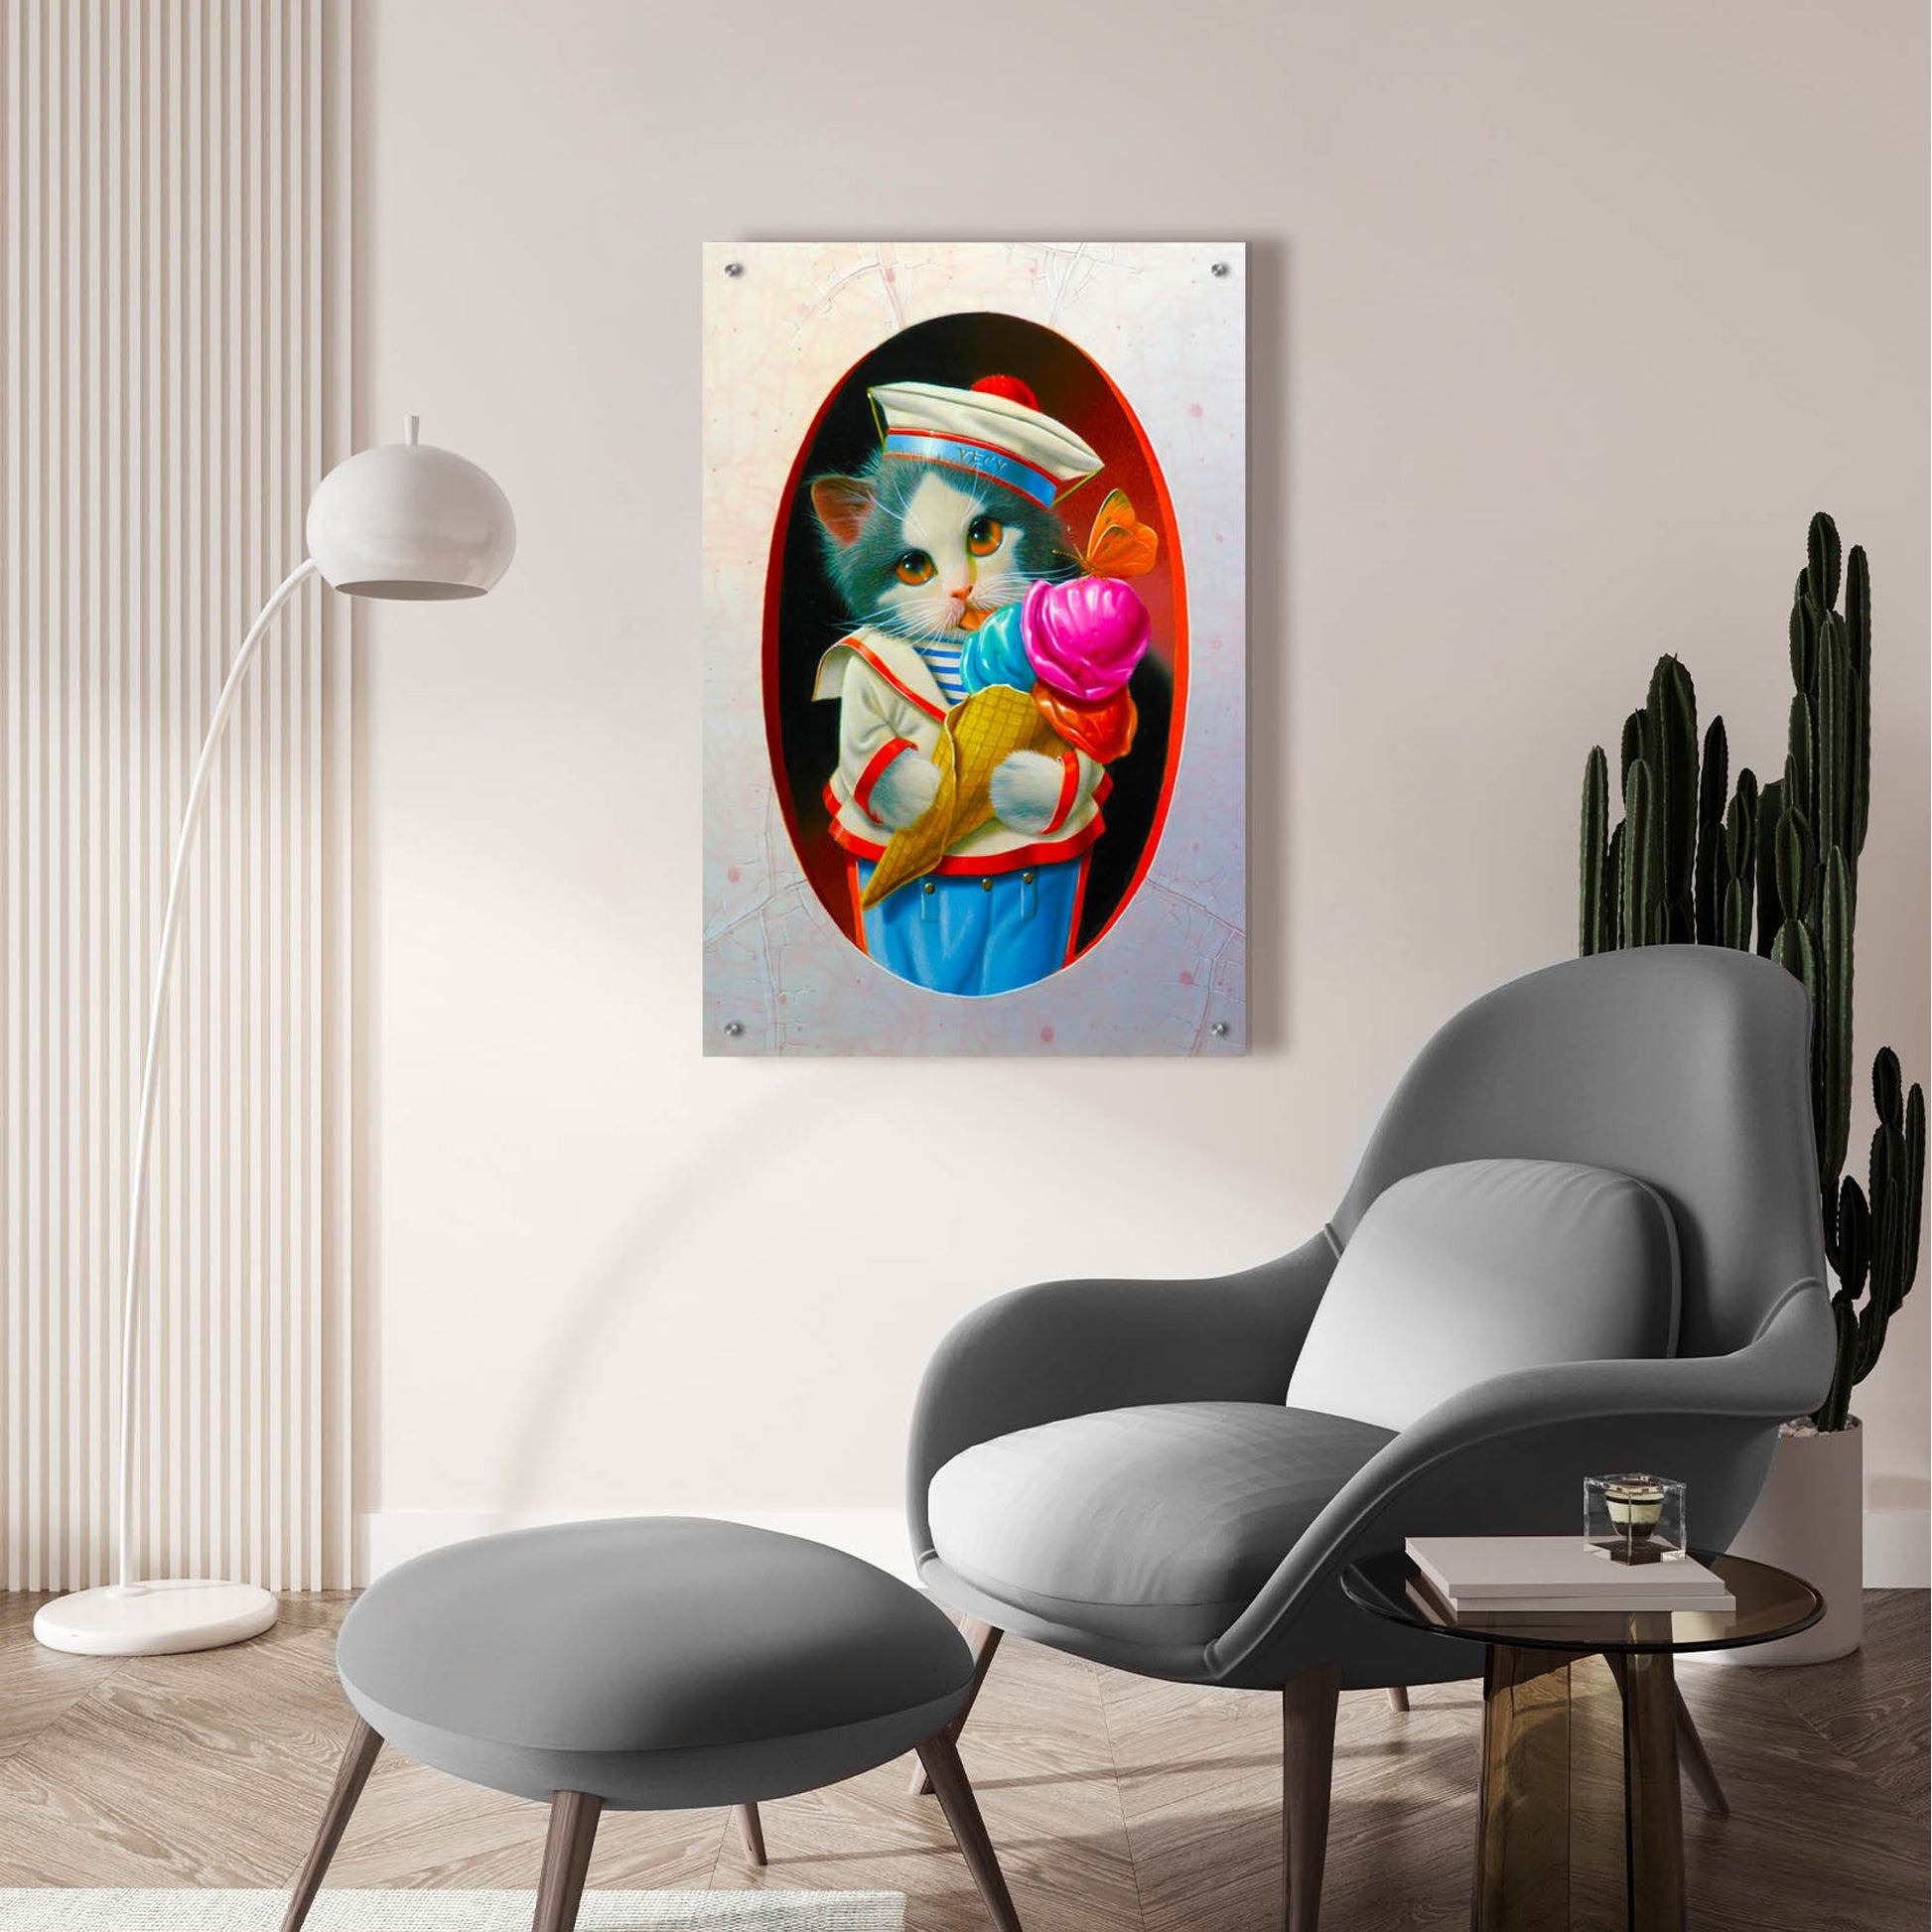 Epic Art 'The Ice Cream Cone' by Valery Vecu Quitard, Acrylic Glass Wall Art,24x36